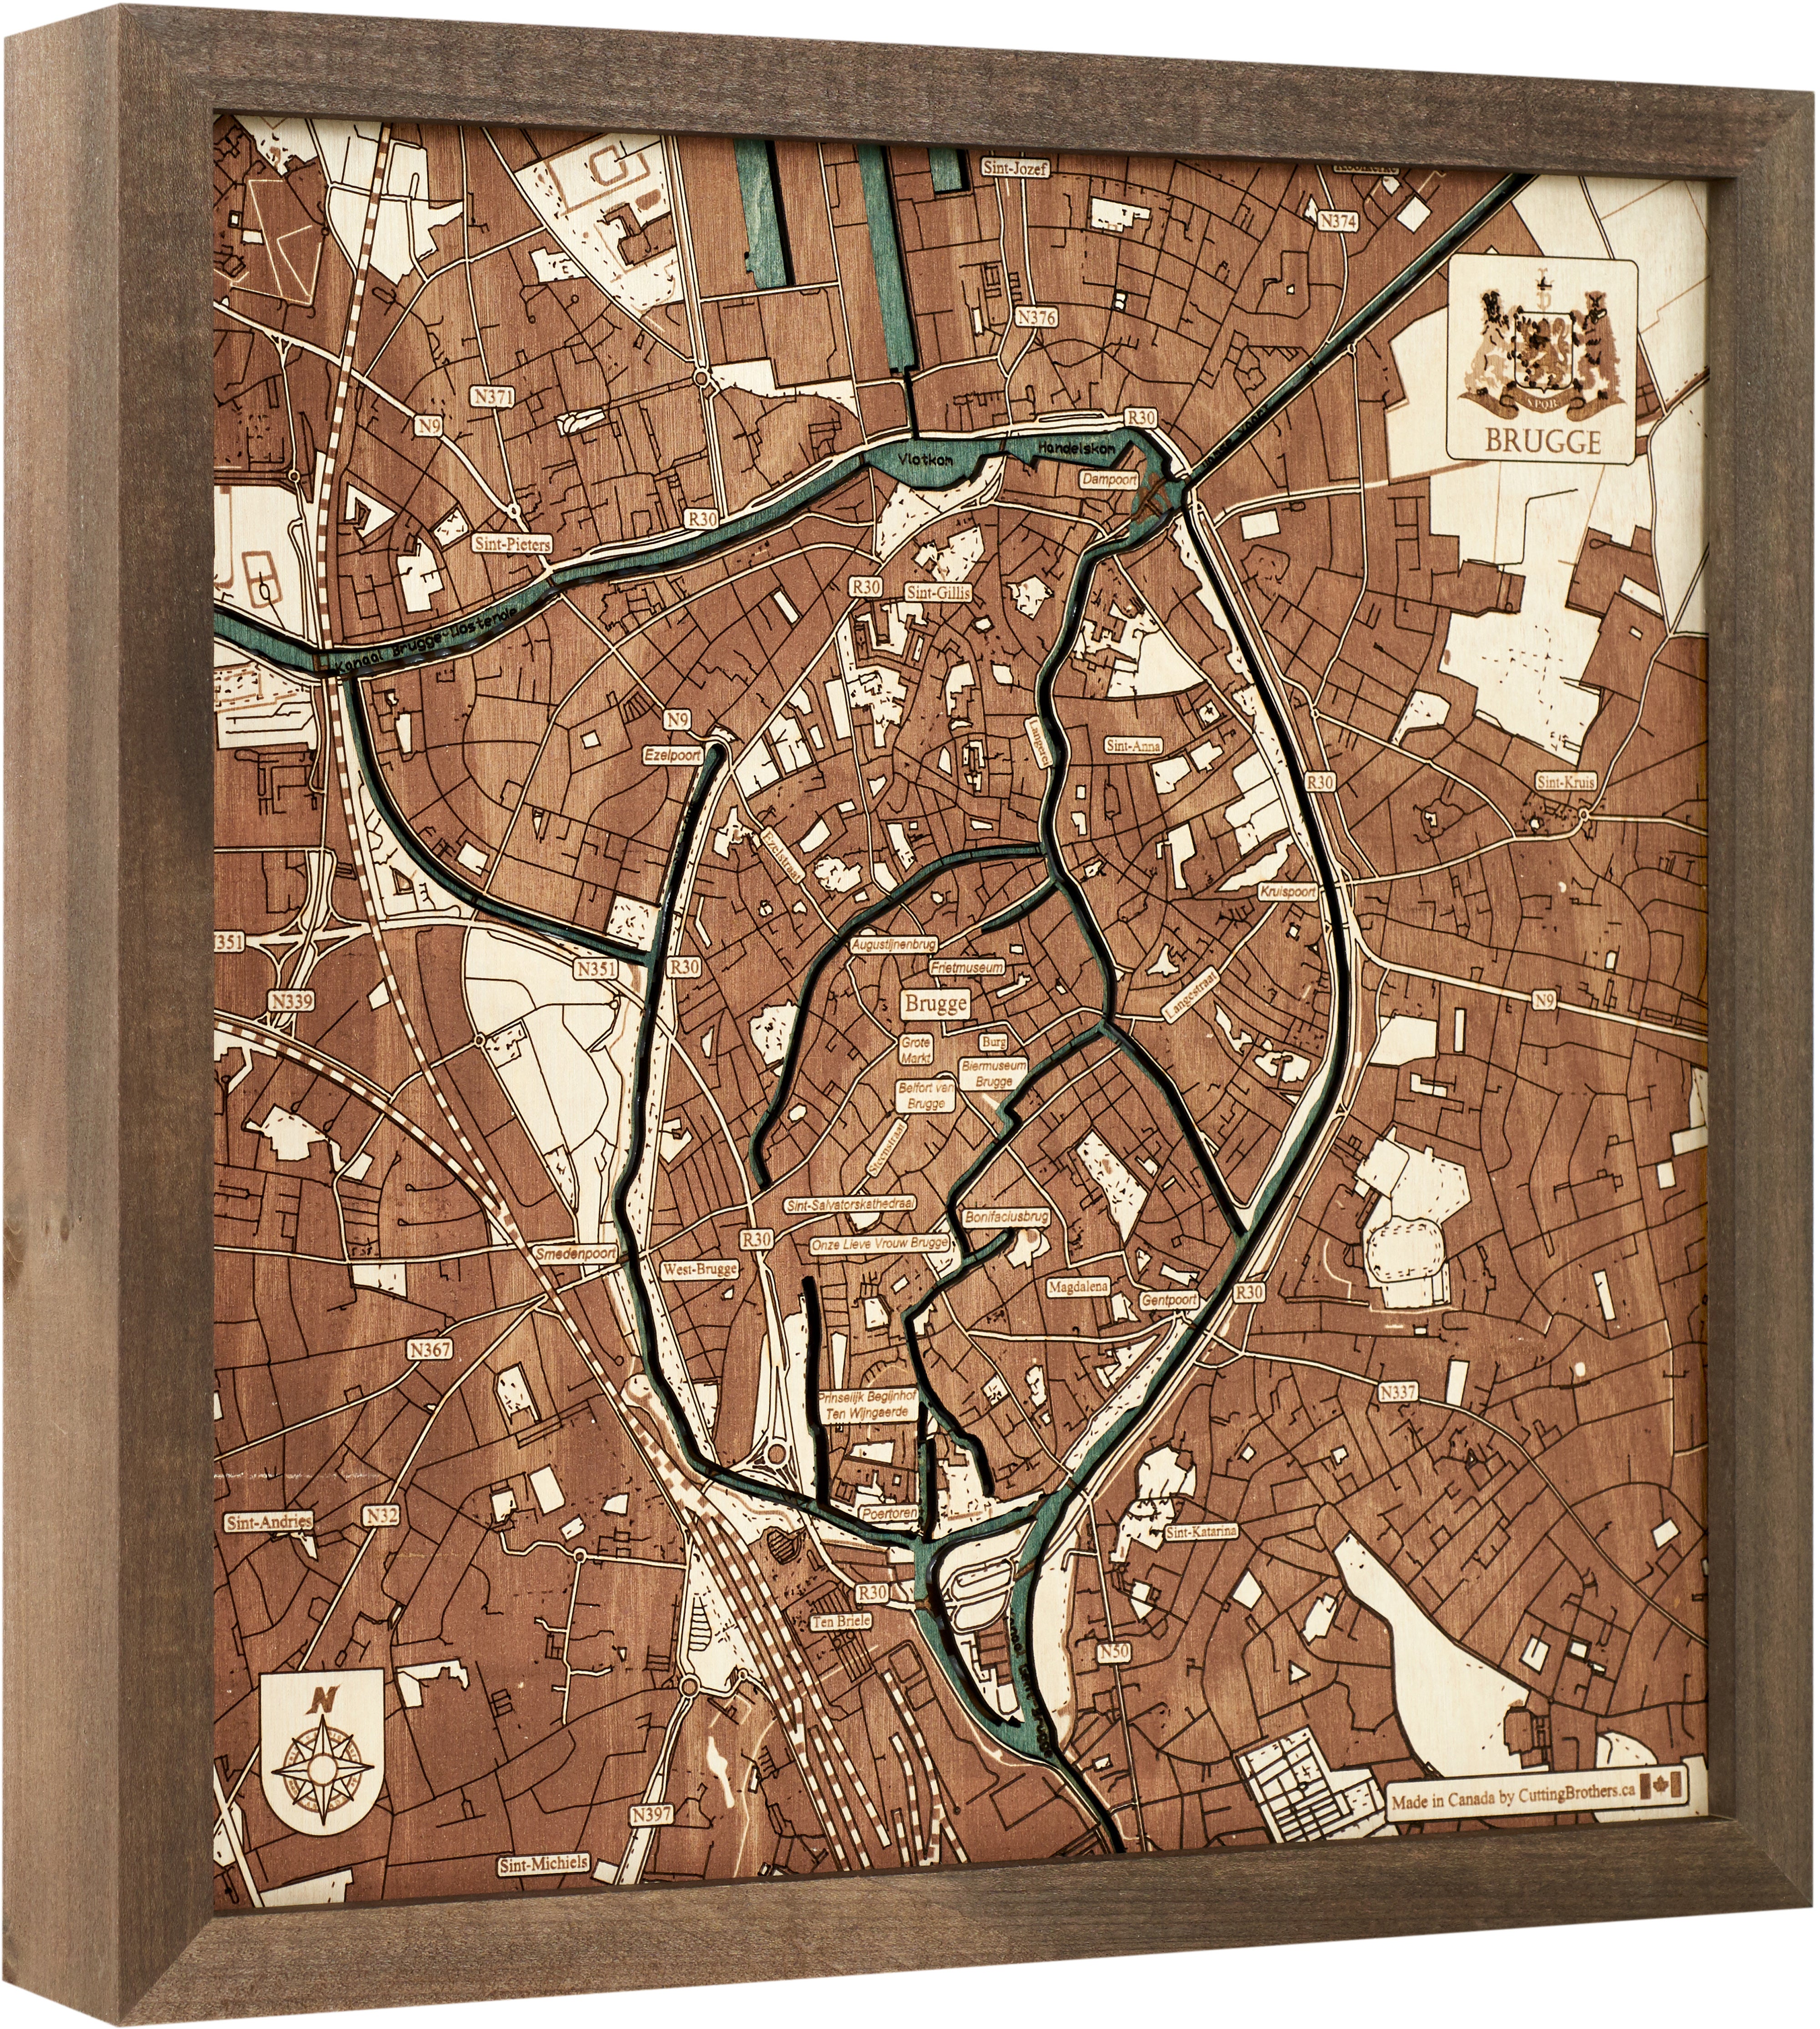 BRUGES 3D Wooden Wall Map - Version S